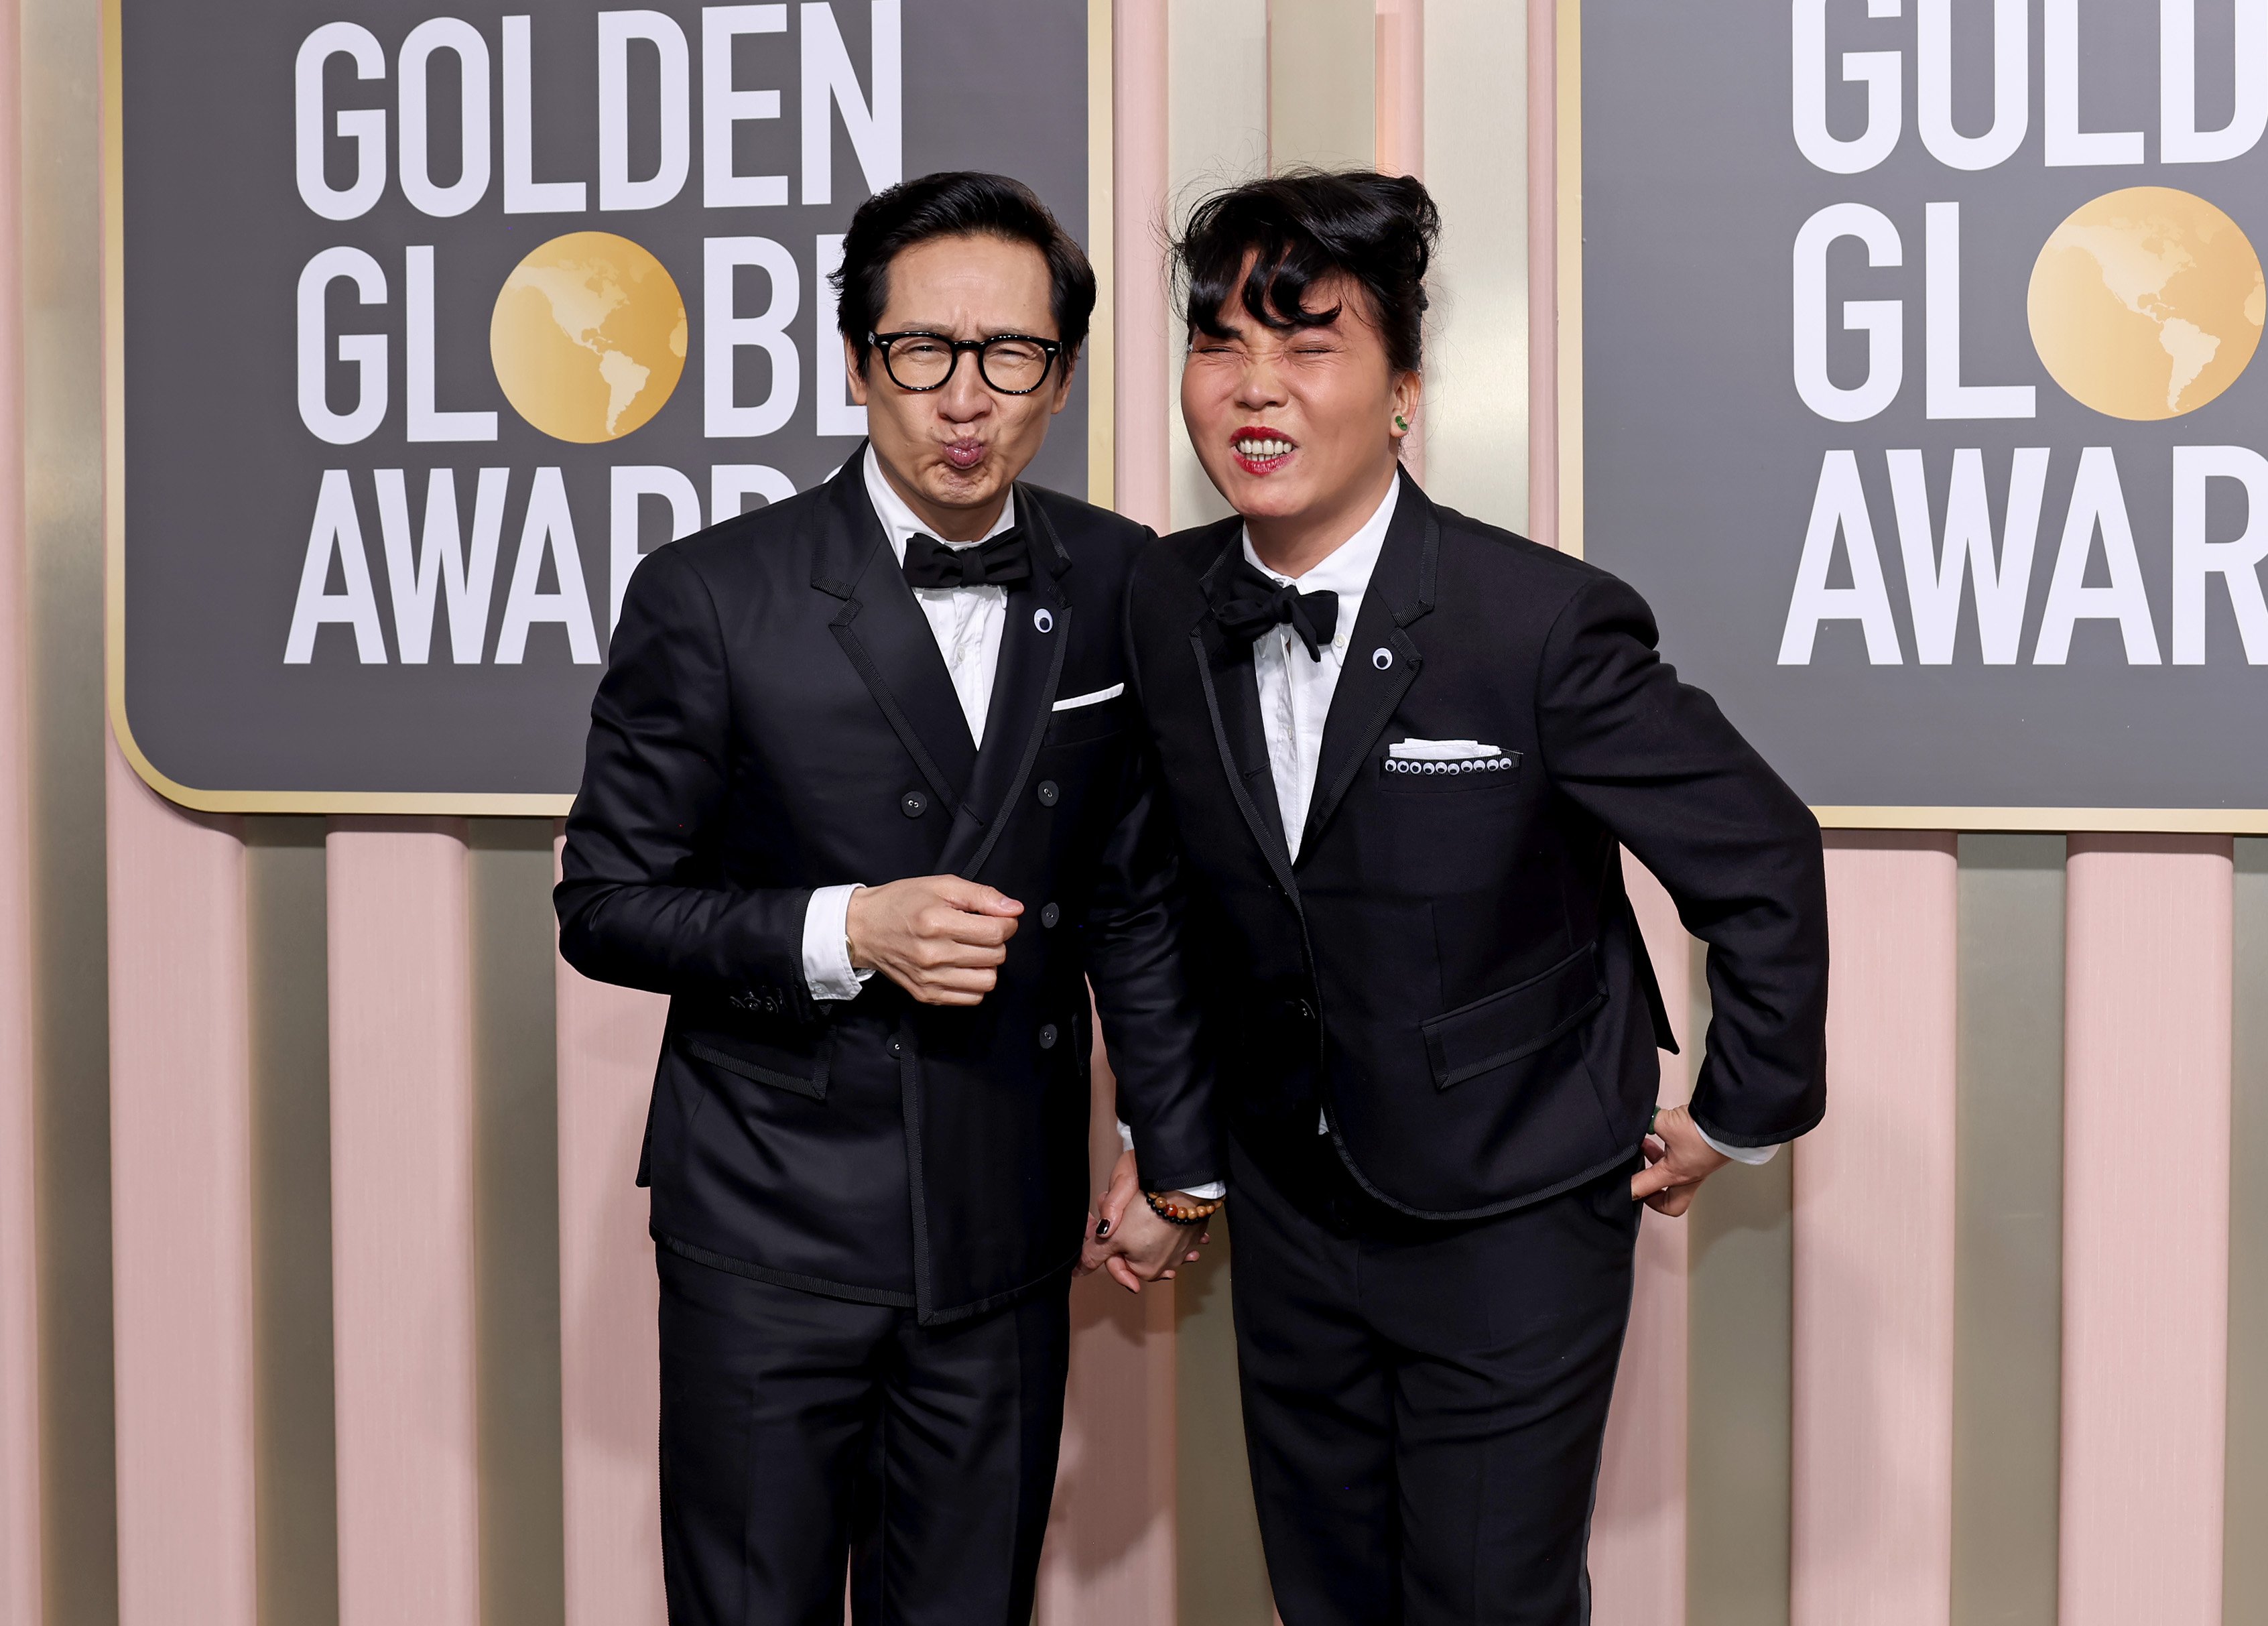 Ke Huy and Echo Quan at the 80th Annual Golden Globe Awards at The Beverly Hilton, in Beverly Hills, CA, on January 10, 2023. | Source: Getty Images